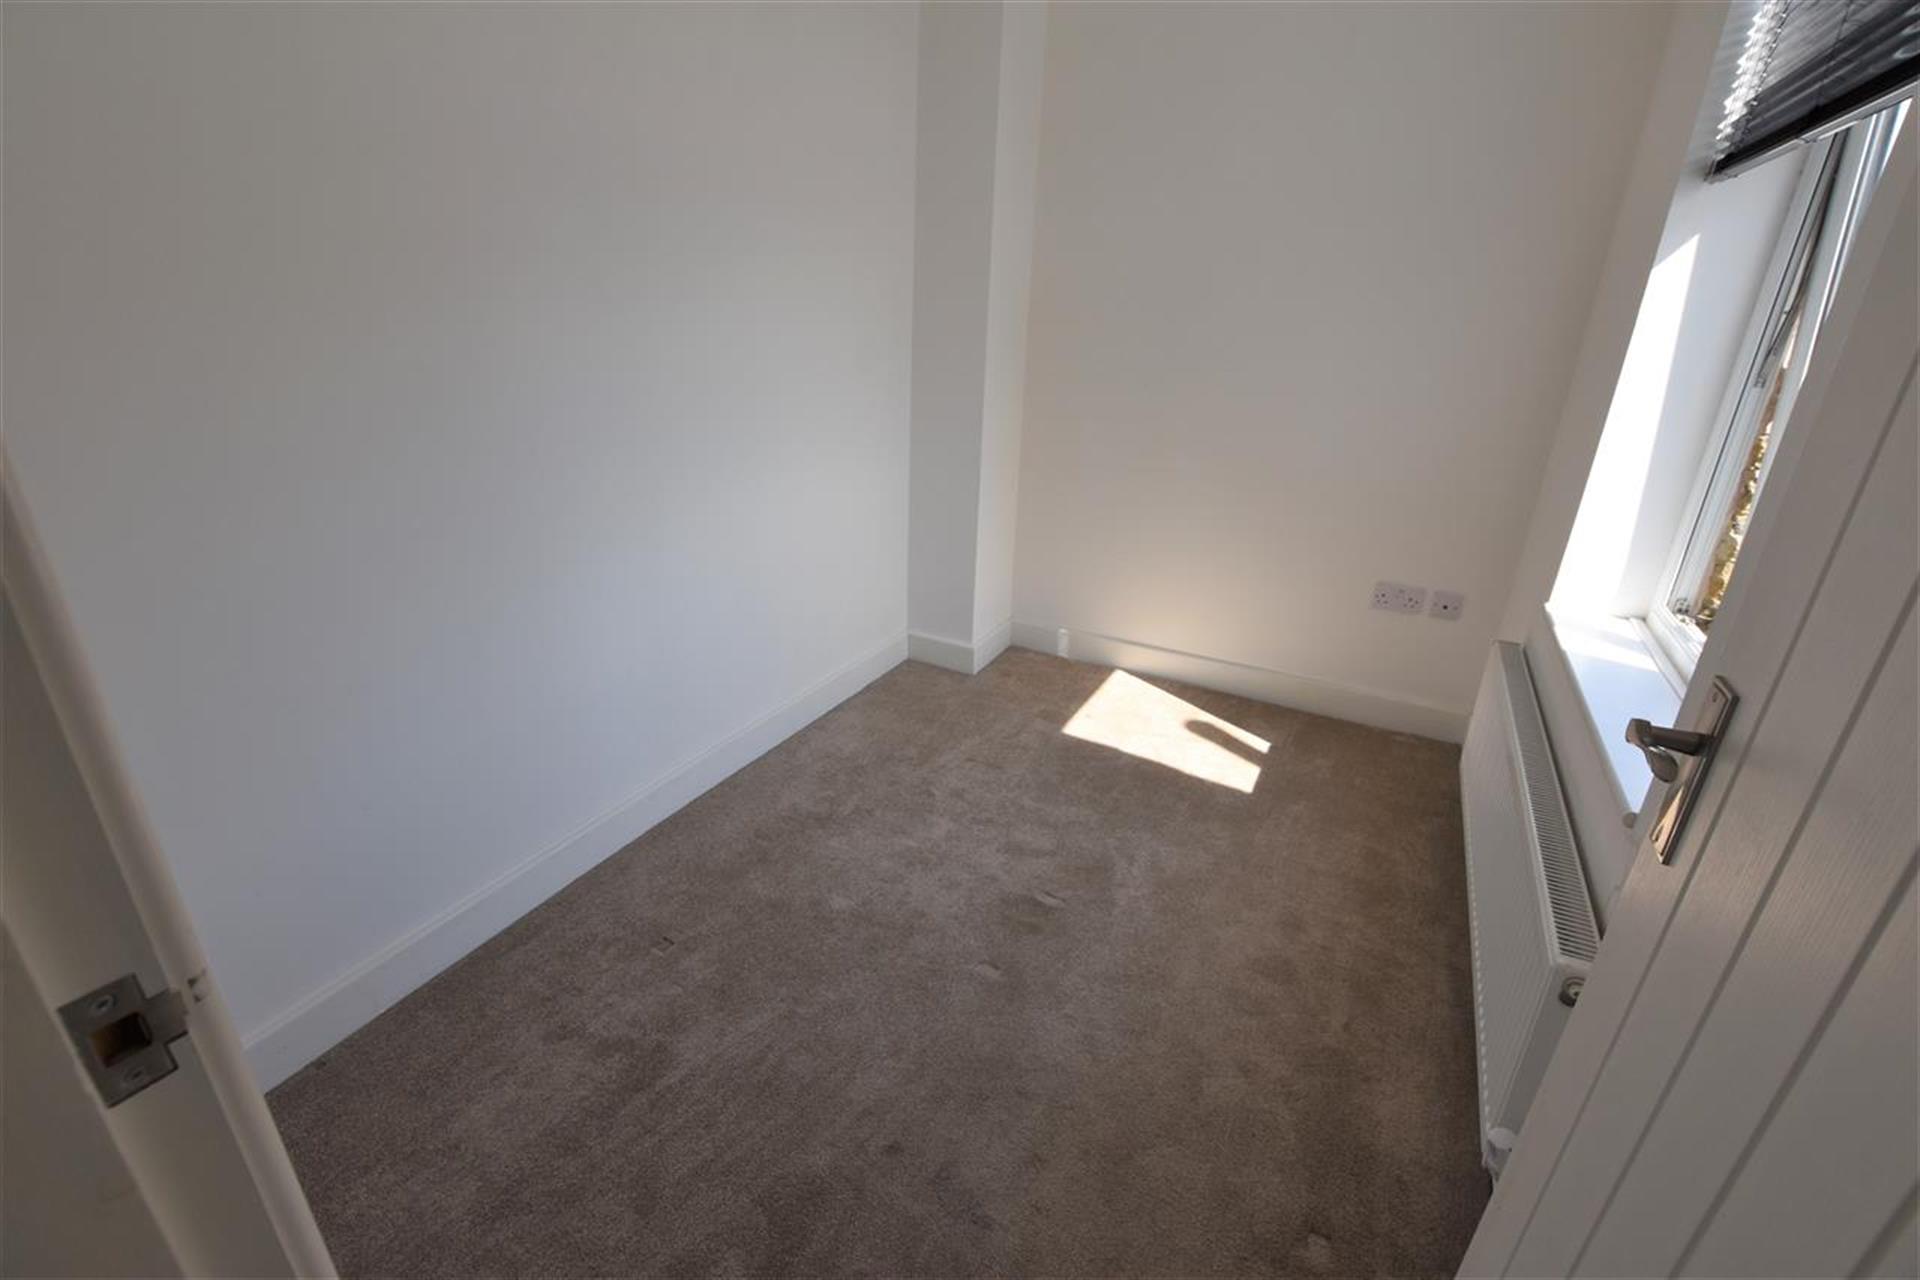 3 Bedroom End Terraced House For Sale - Bedroom Three